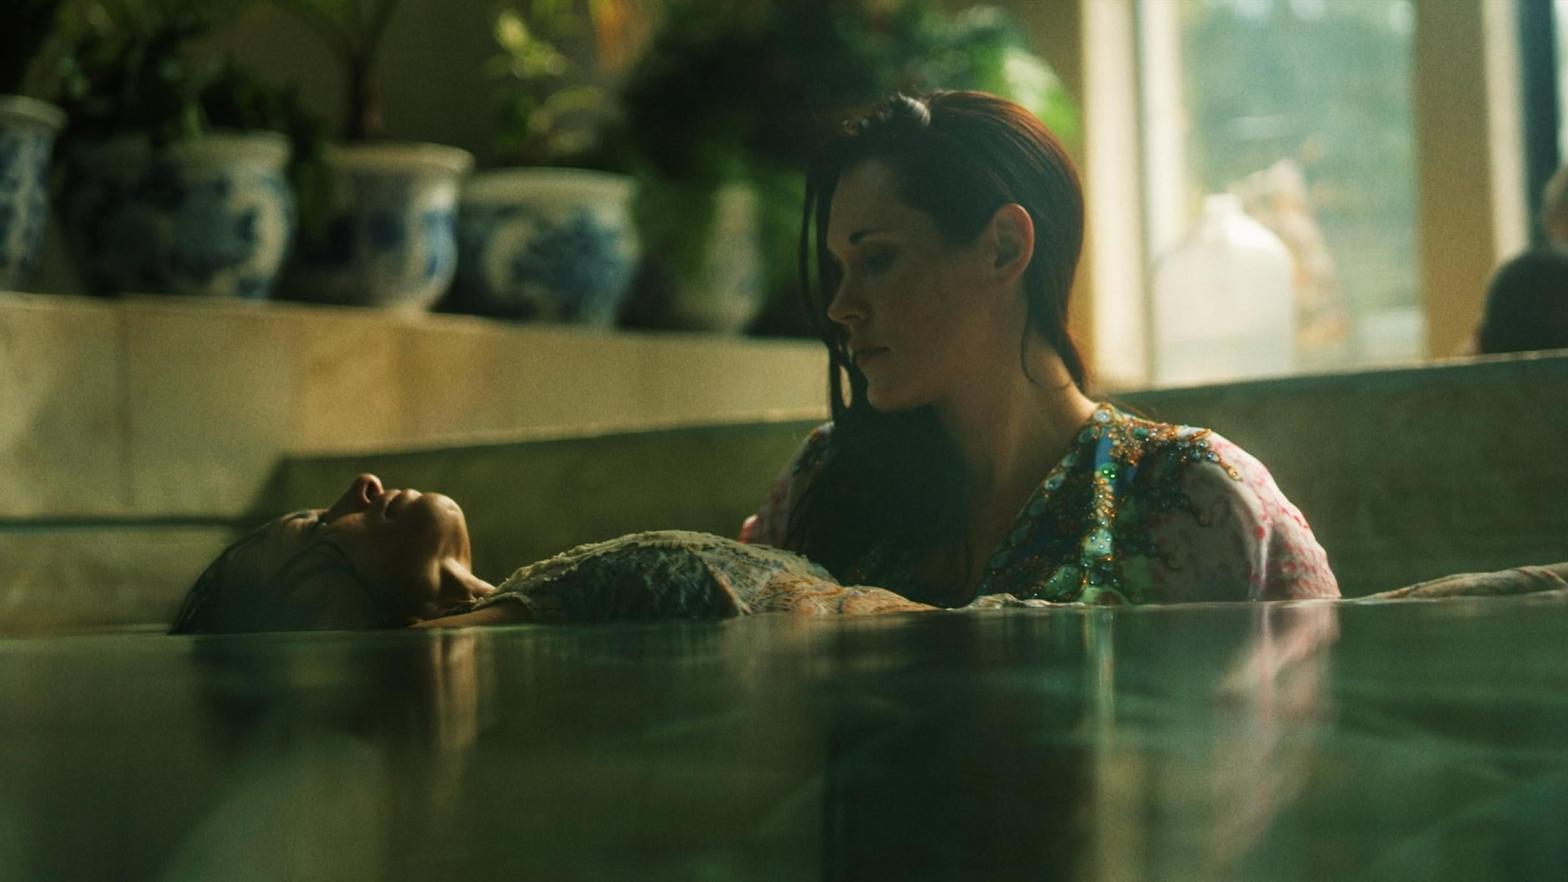 The Deep End follows Teal Swan's dubious journey to end human suffering. (Photo: Freeform)